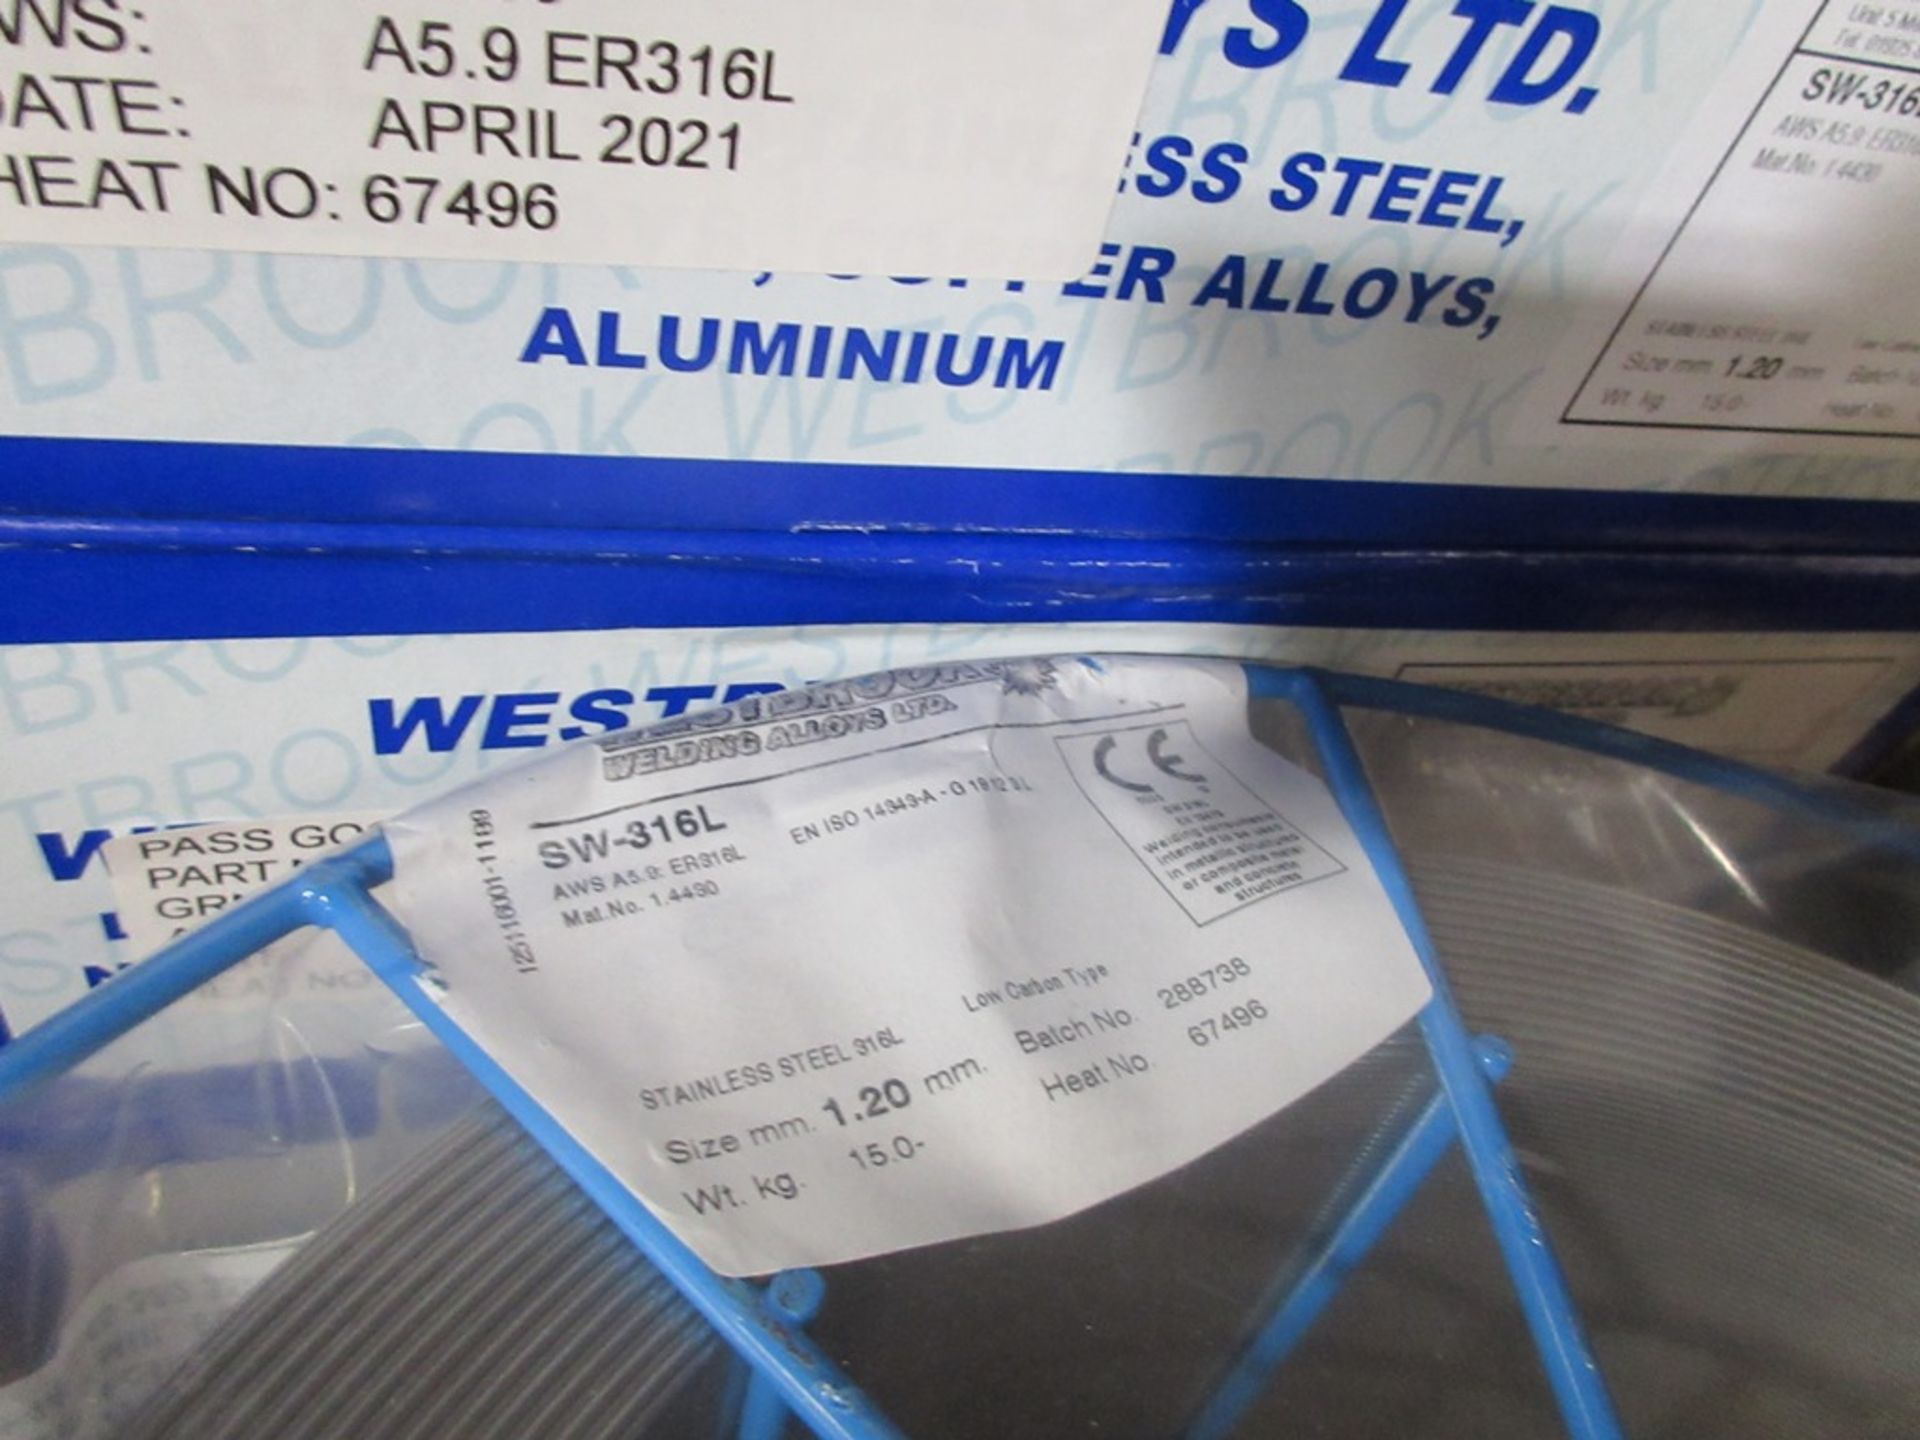 Ten reels of SW 316L stainless steel low carbon welding wire, part no. R316L/1.2 - Image 4 of 5